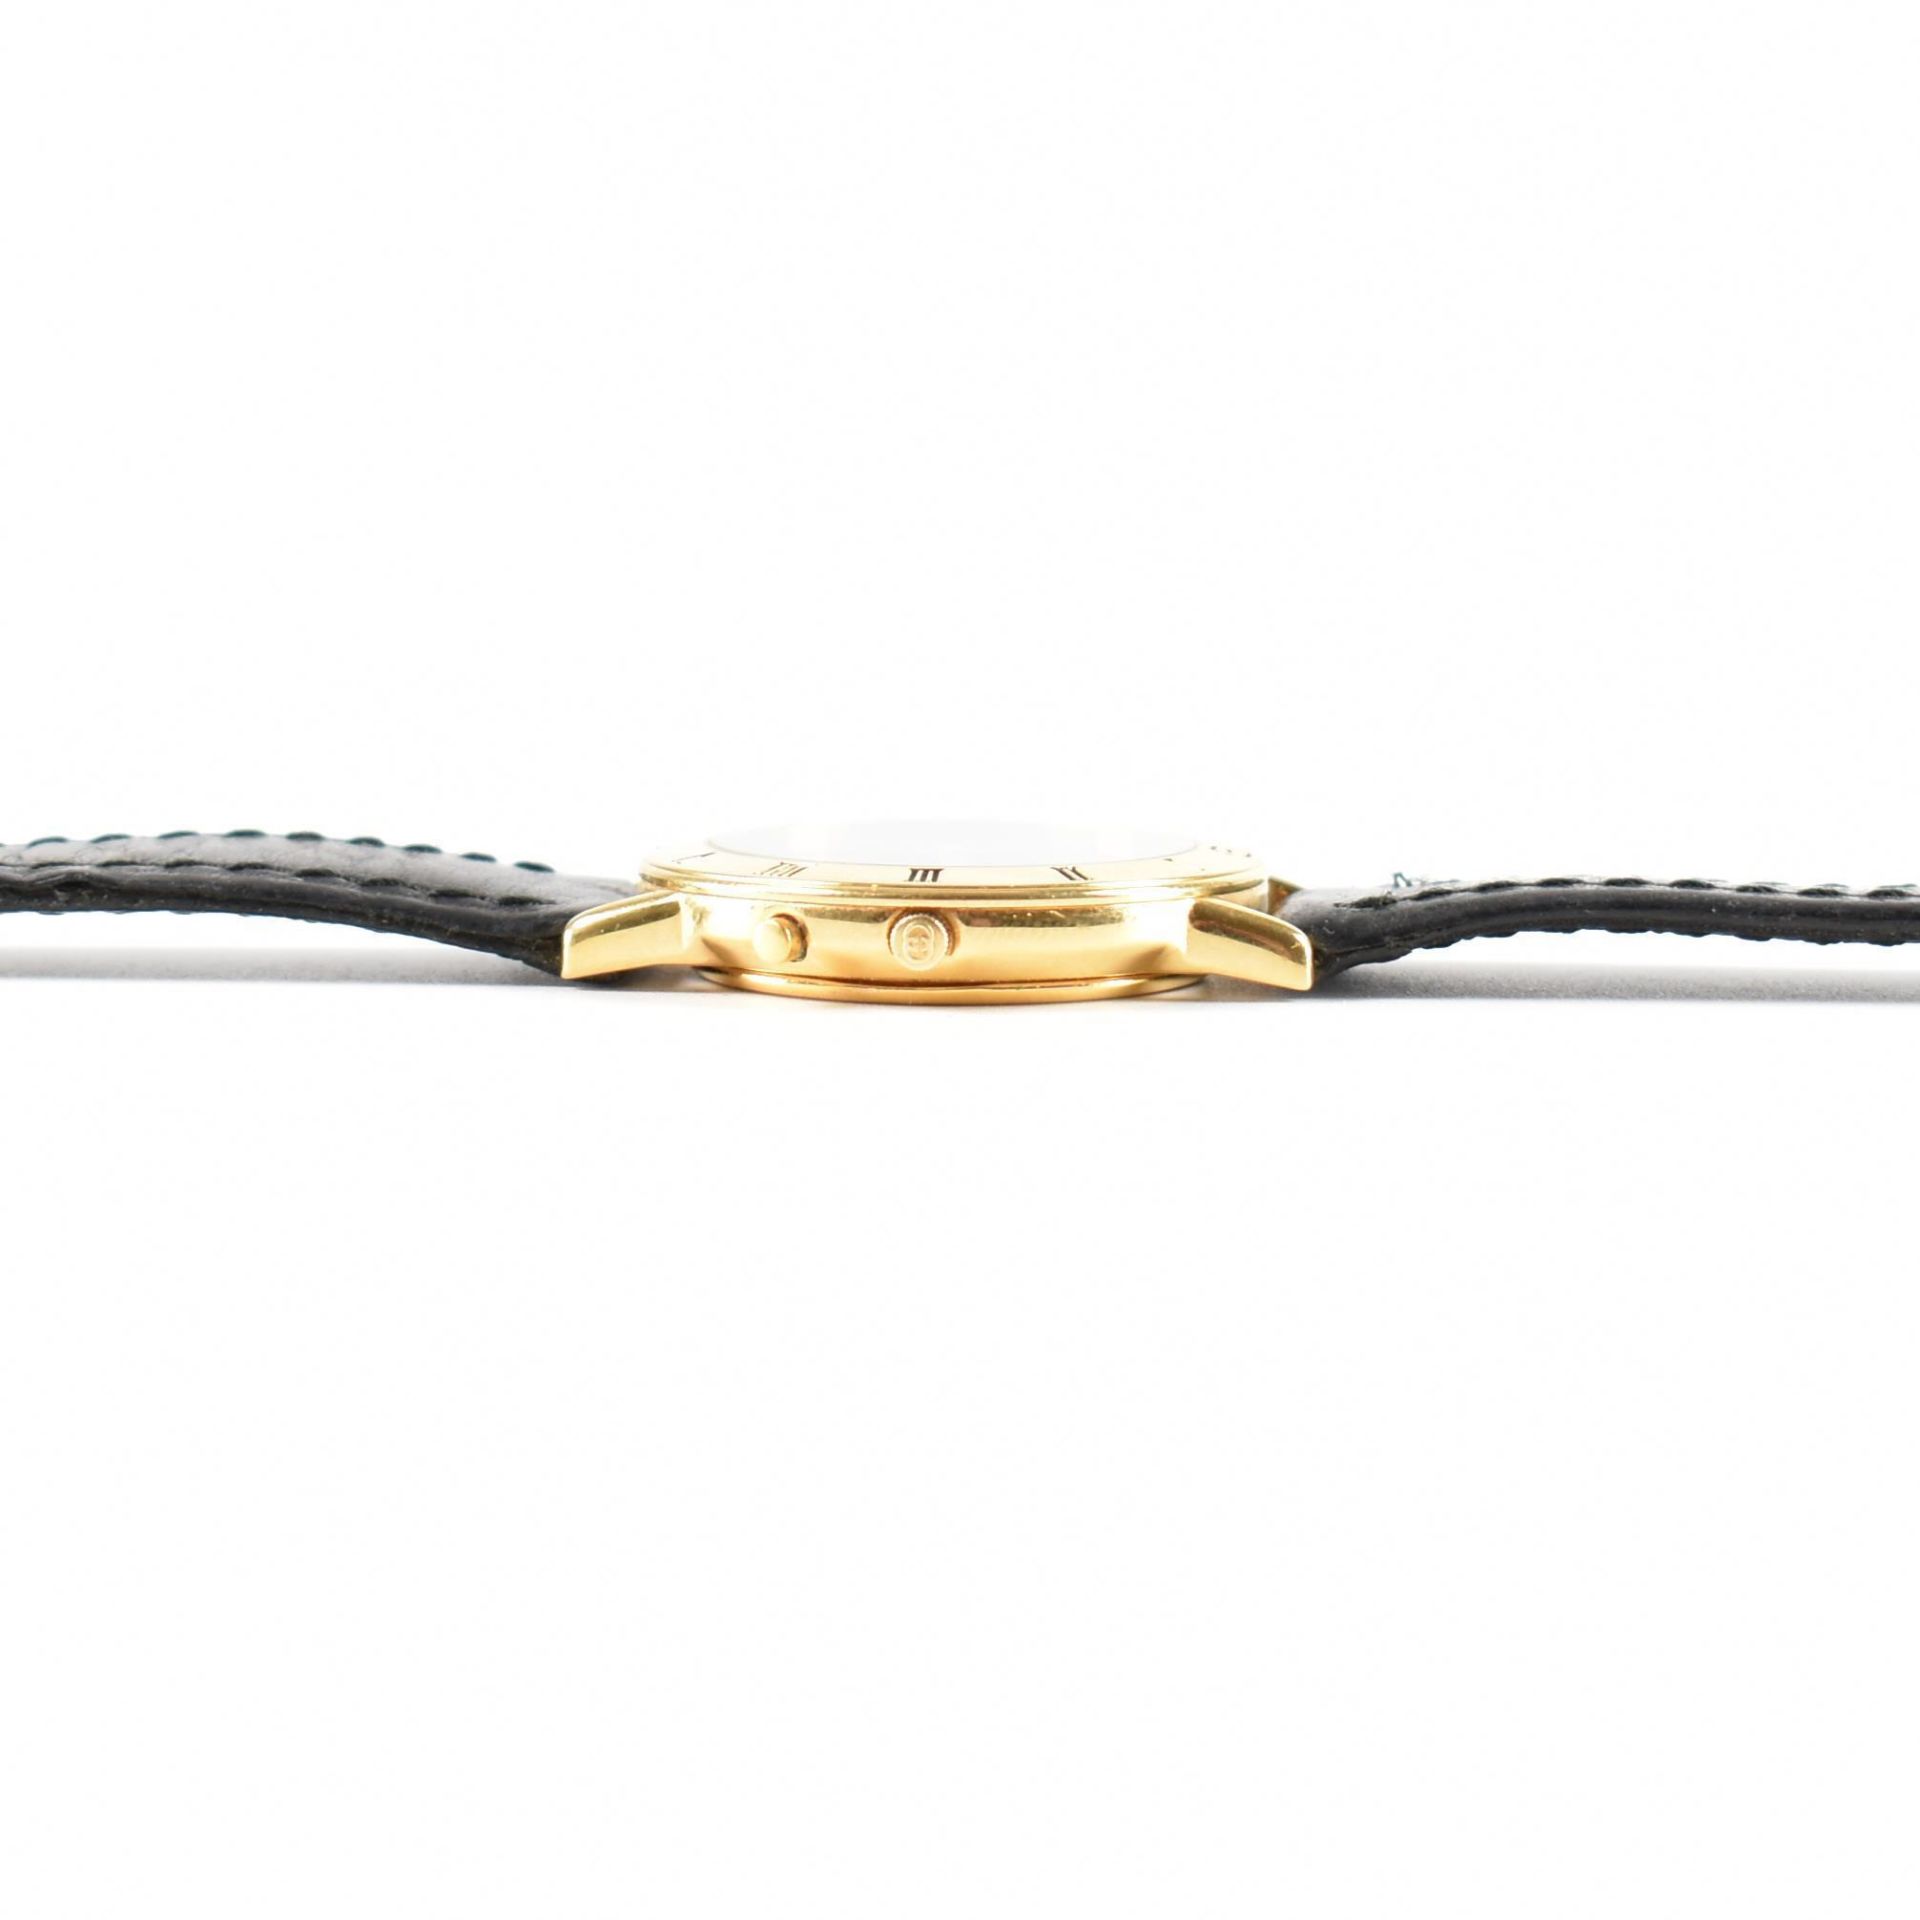 GUCCI GOLD PLATED WRIST WATCH - Image 4 of 5